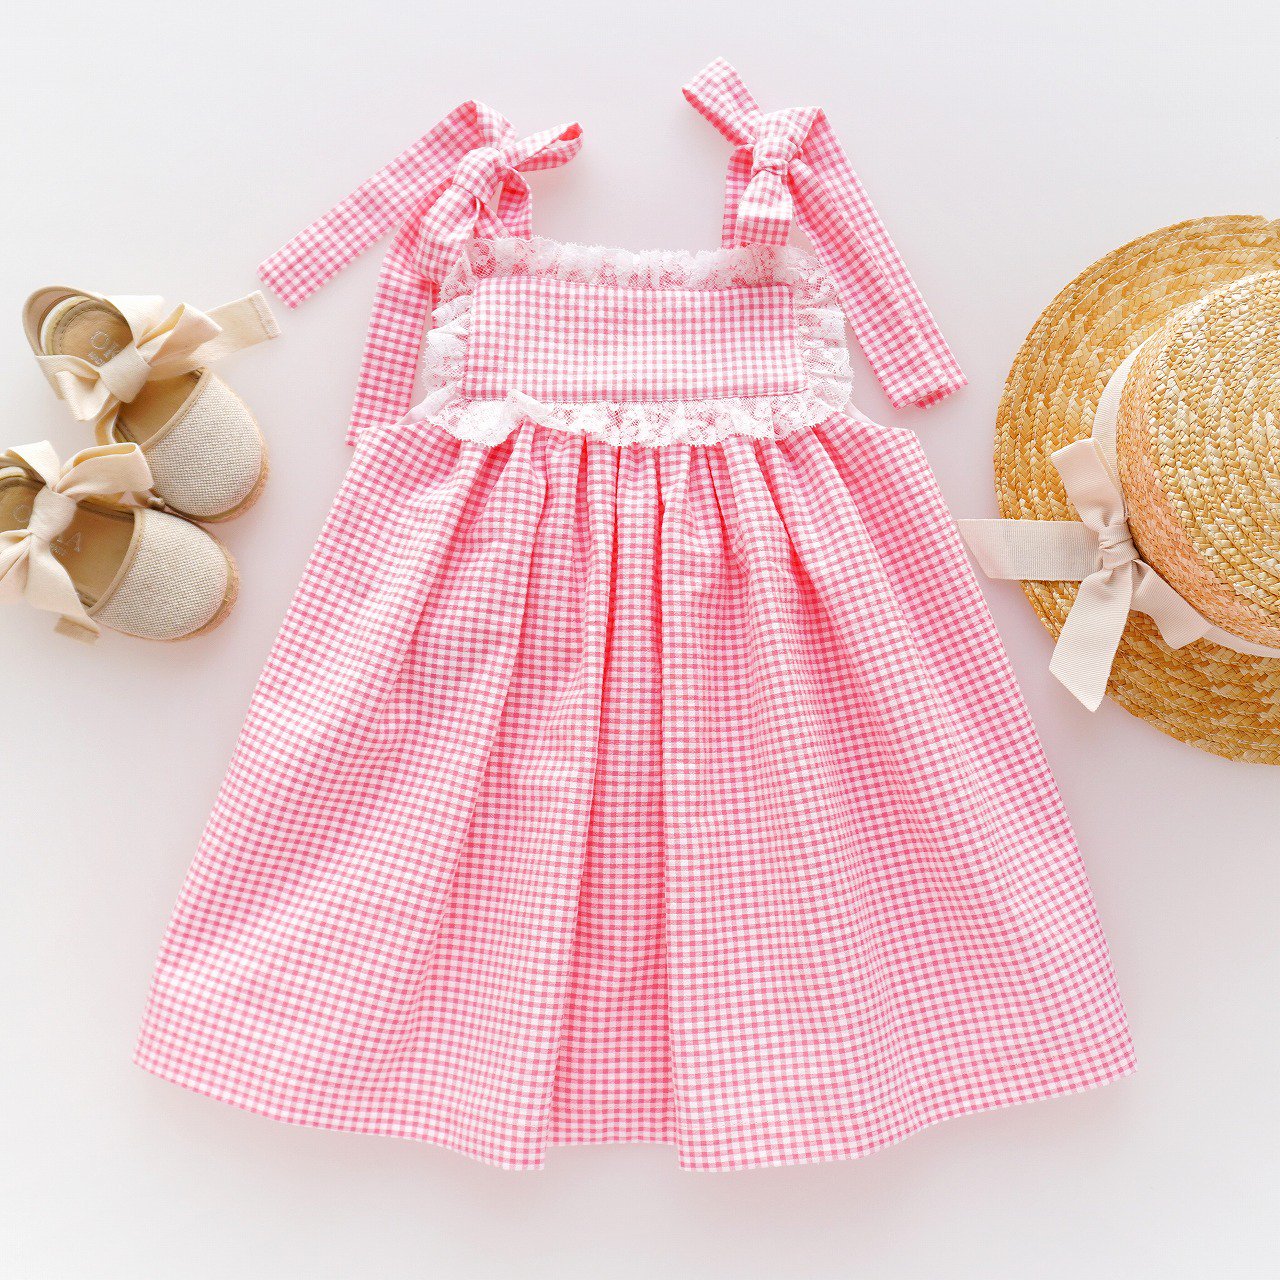 <img class='new_mark_img1' src='https://img.shop-pro.jp/img/new/icons1.gif' style='border:none;display:inline;margin:0px;padding:0px;width:auto;' />Camellia boutique - Pink vichy summer dress